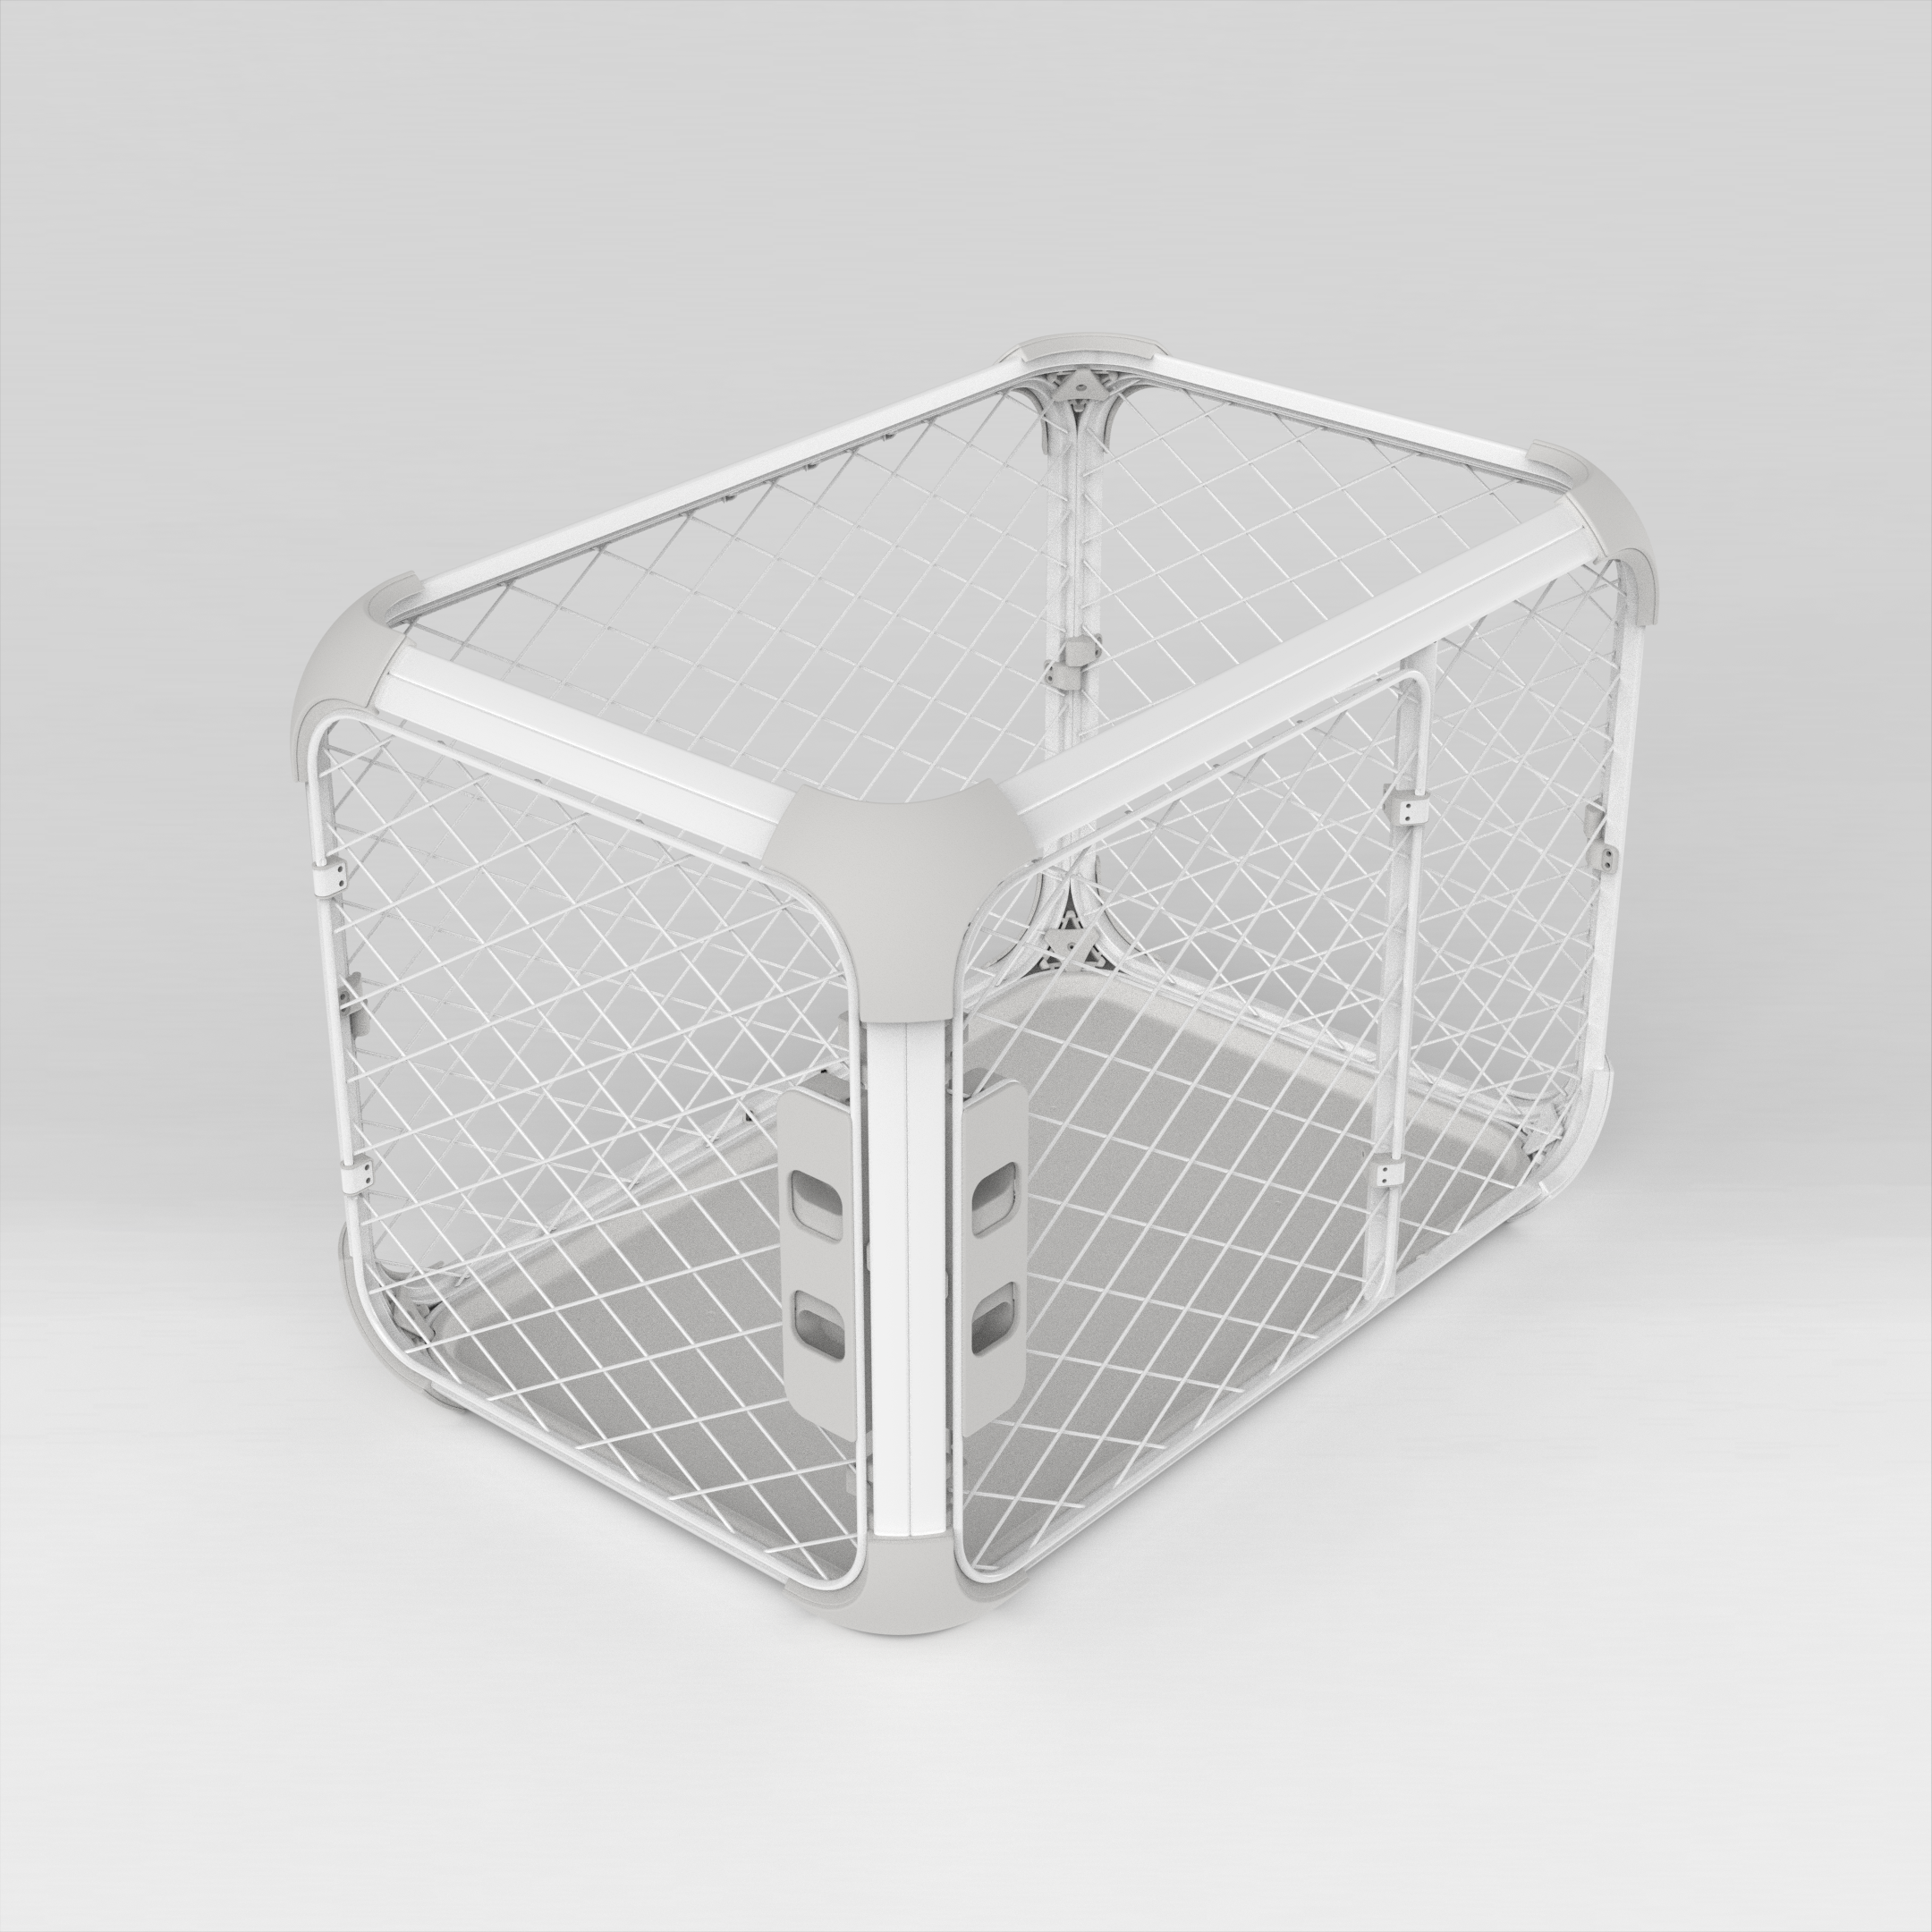 Diagonal front view of Evolv Dog Crate in Playpen Mode, with ceiling mesh removed and additional top frame added.